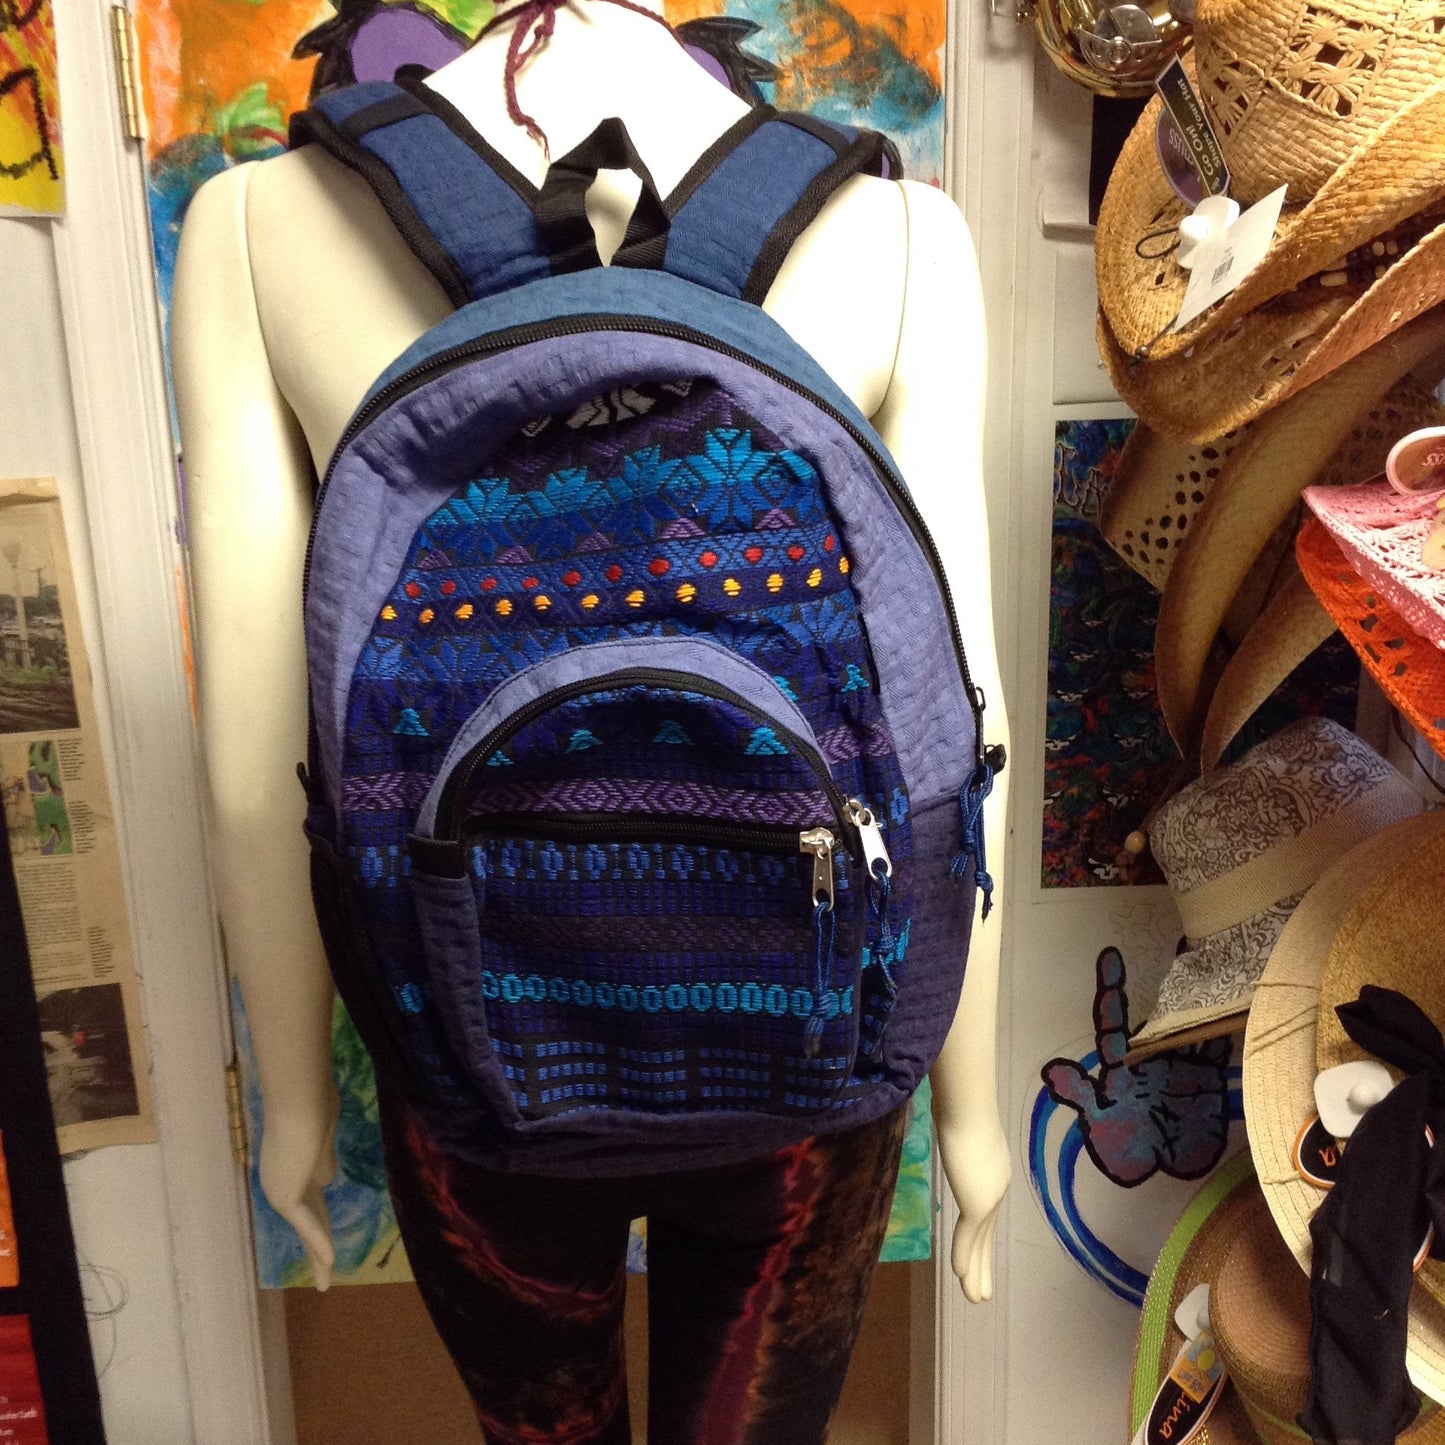 Basket Weave with Hand Woven Front Backpack - HalfMoonMusic